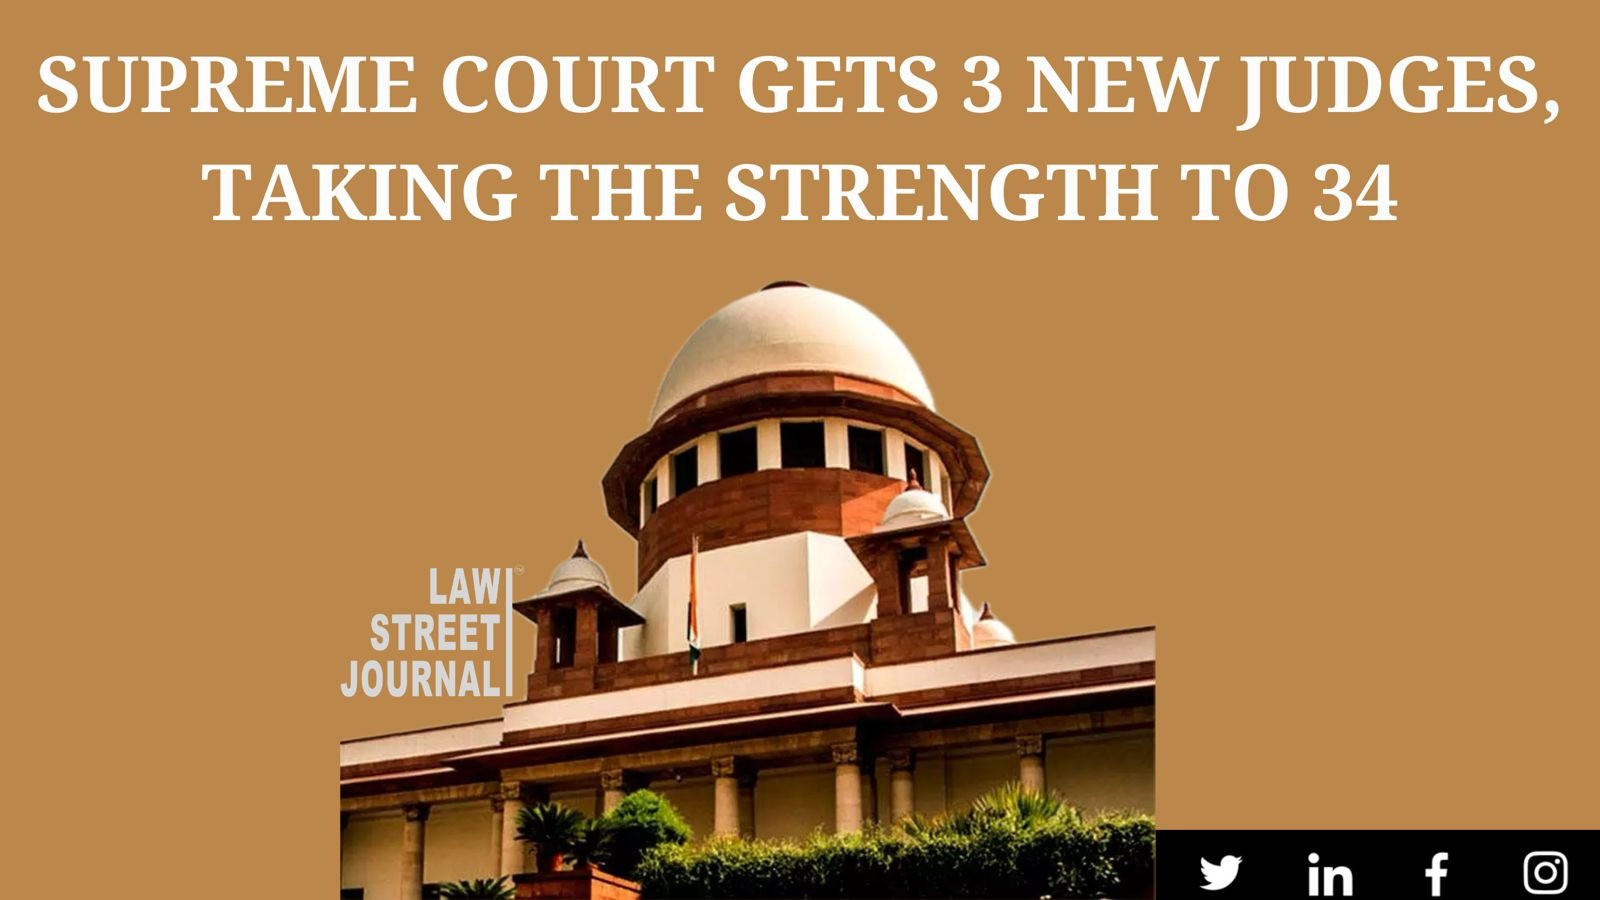 Supreme Court gets 3 new judges, taking the strength to 34